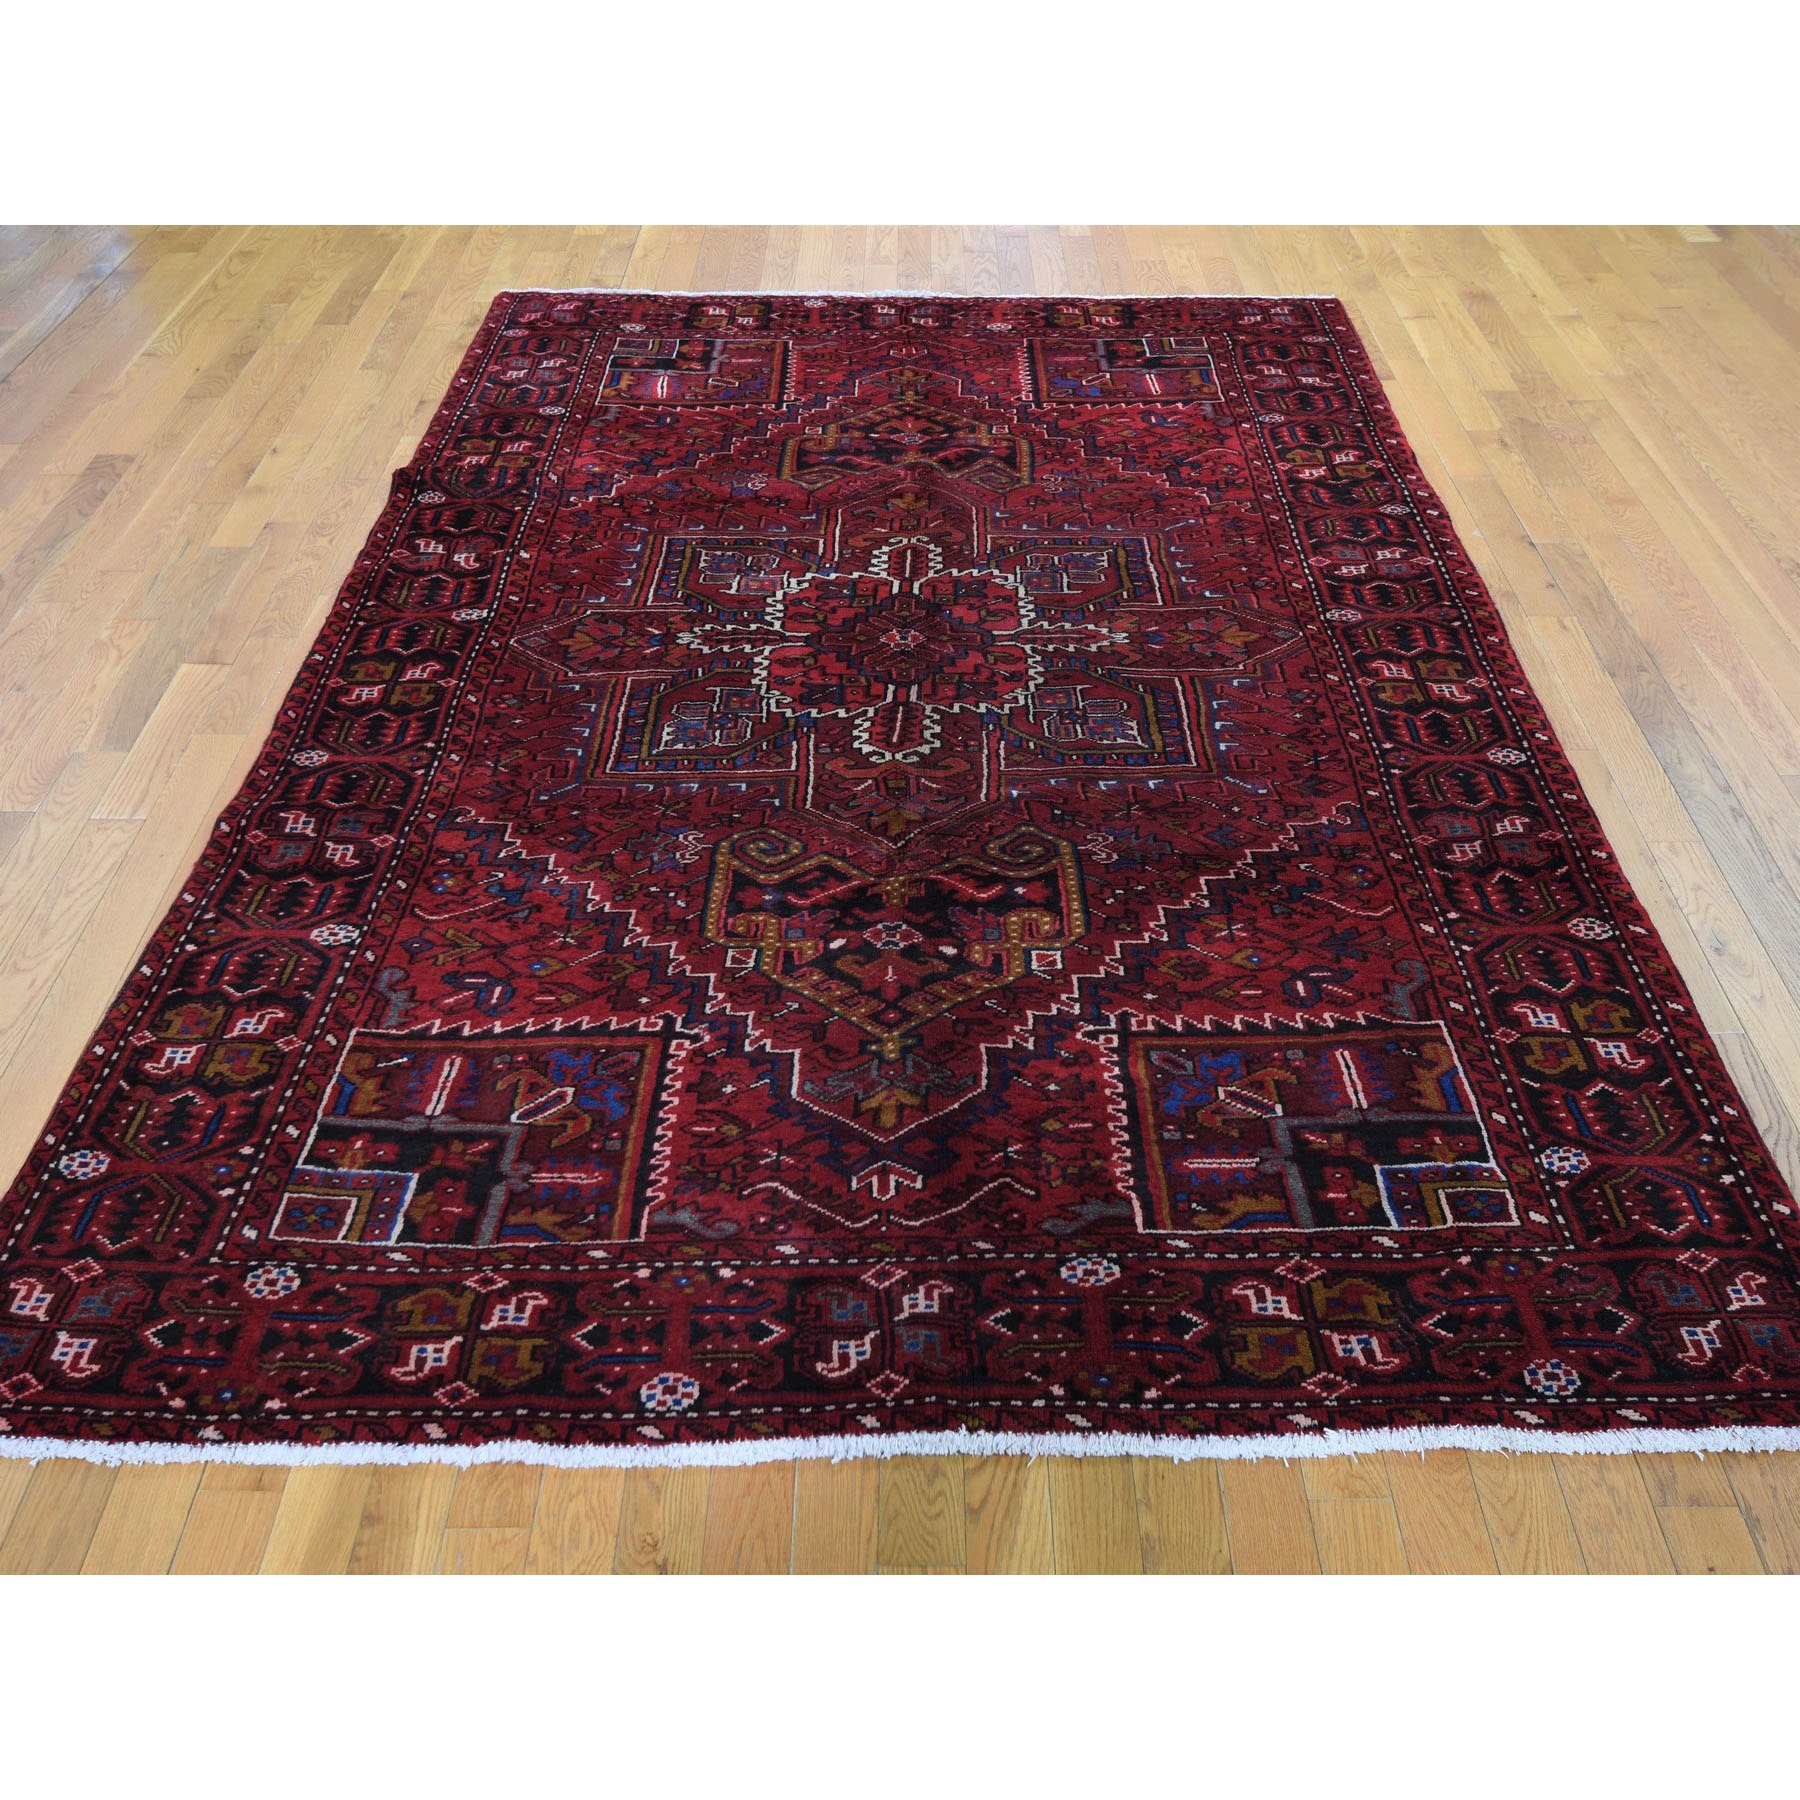 6-6 x9-5  Red Semi Antique Persian Heriz Geometric Design Thick and Plush Hand Knotted Oriental Rug 